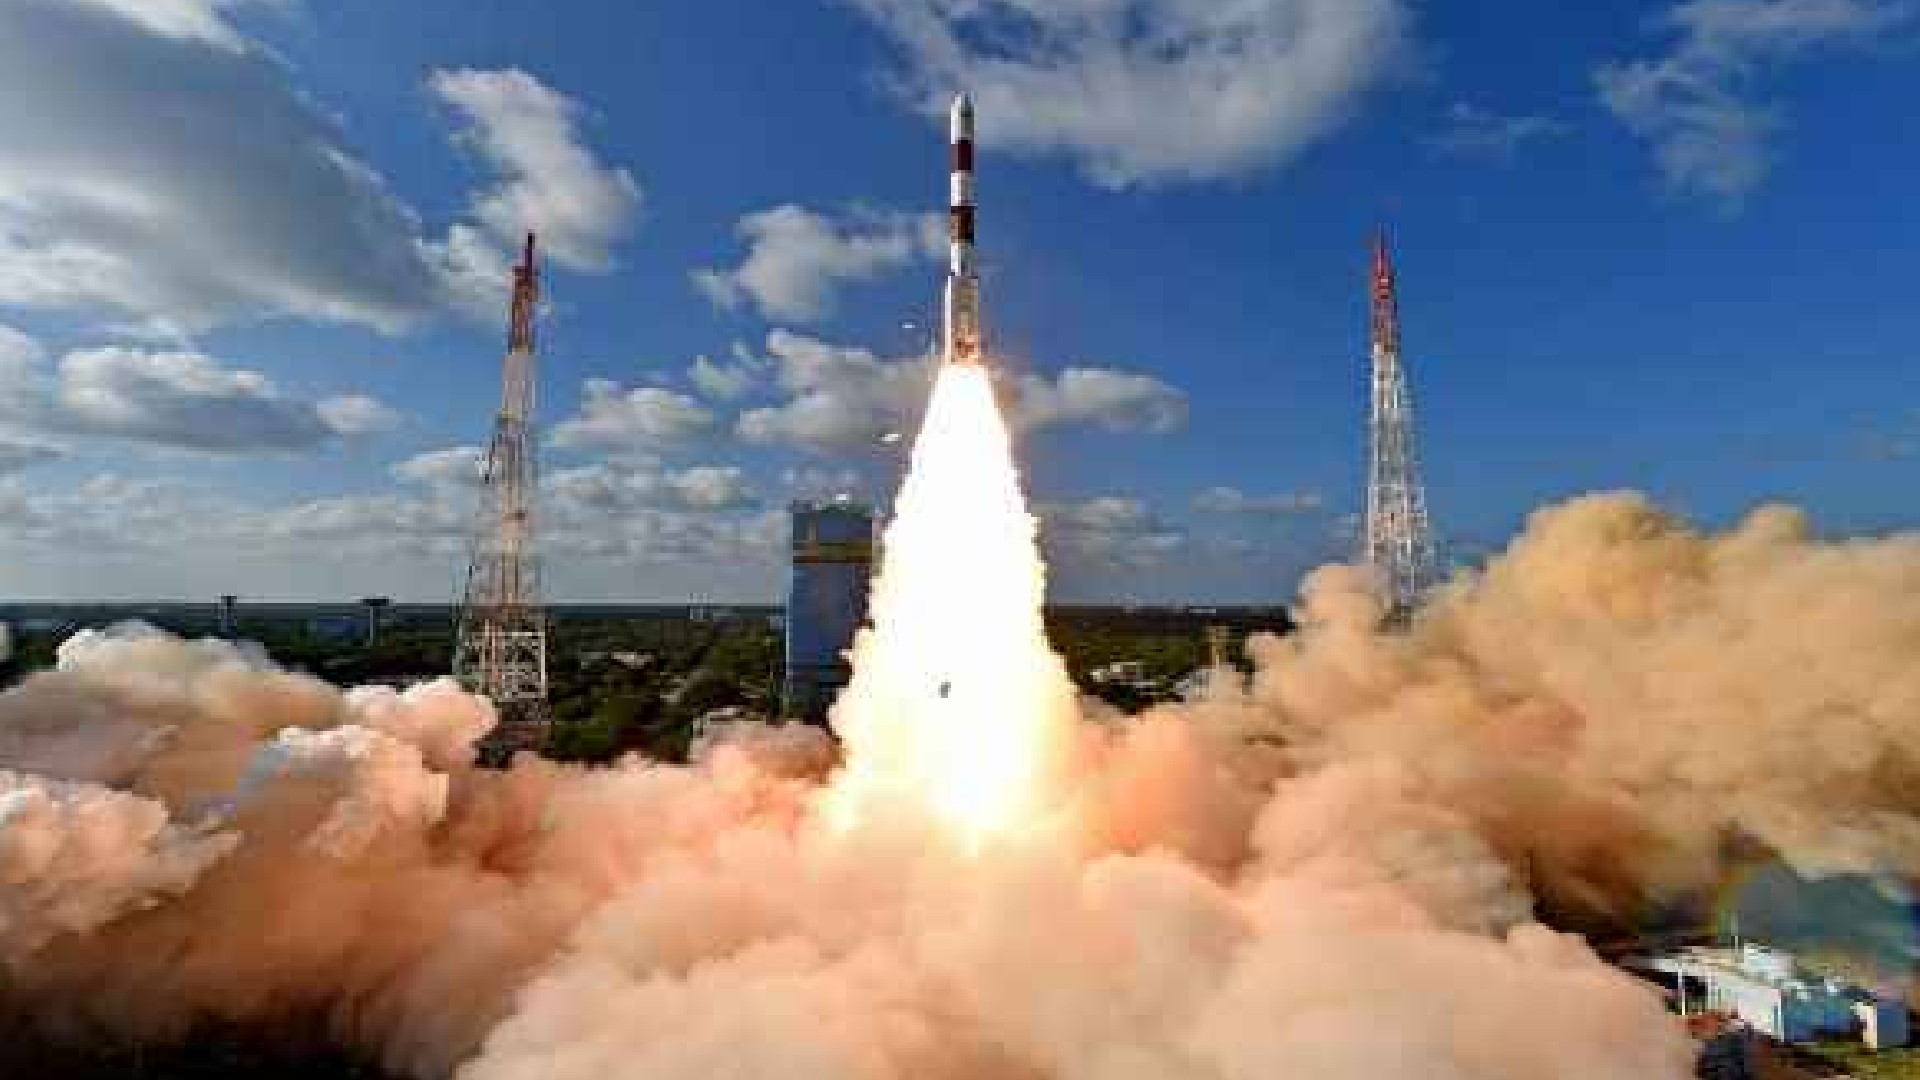 ISRO’s GISAT-1 Satellite Will Give Real-Time Visuals Of India’s Borders